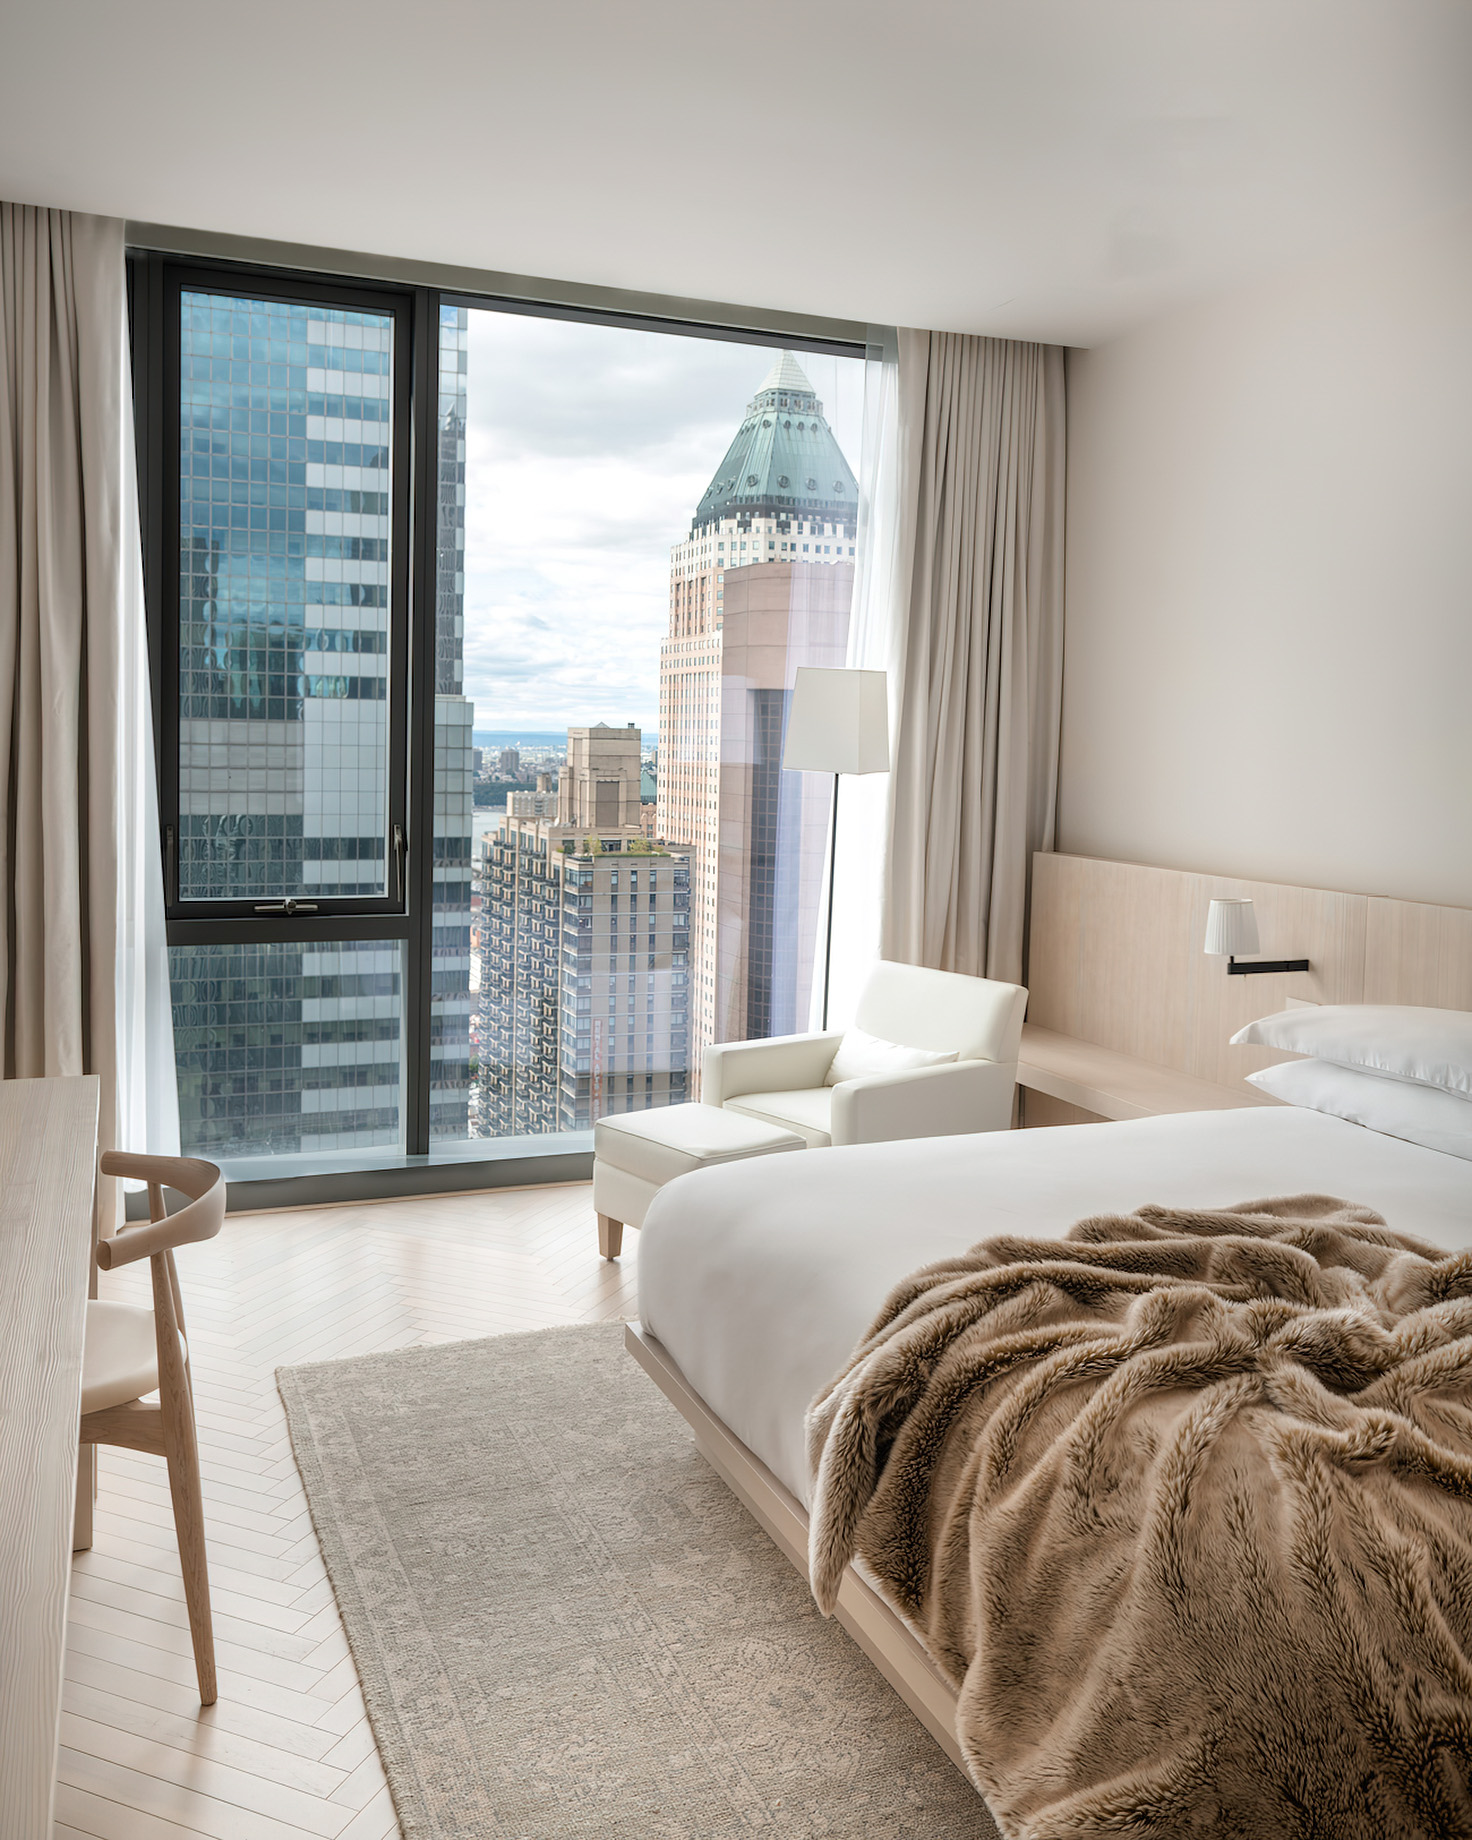 The Times Square EDITION Hotel - New York, NY, USA - Guest Room Interior View